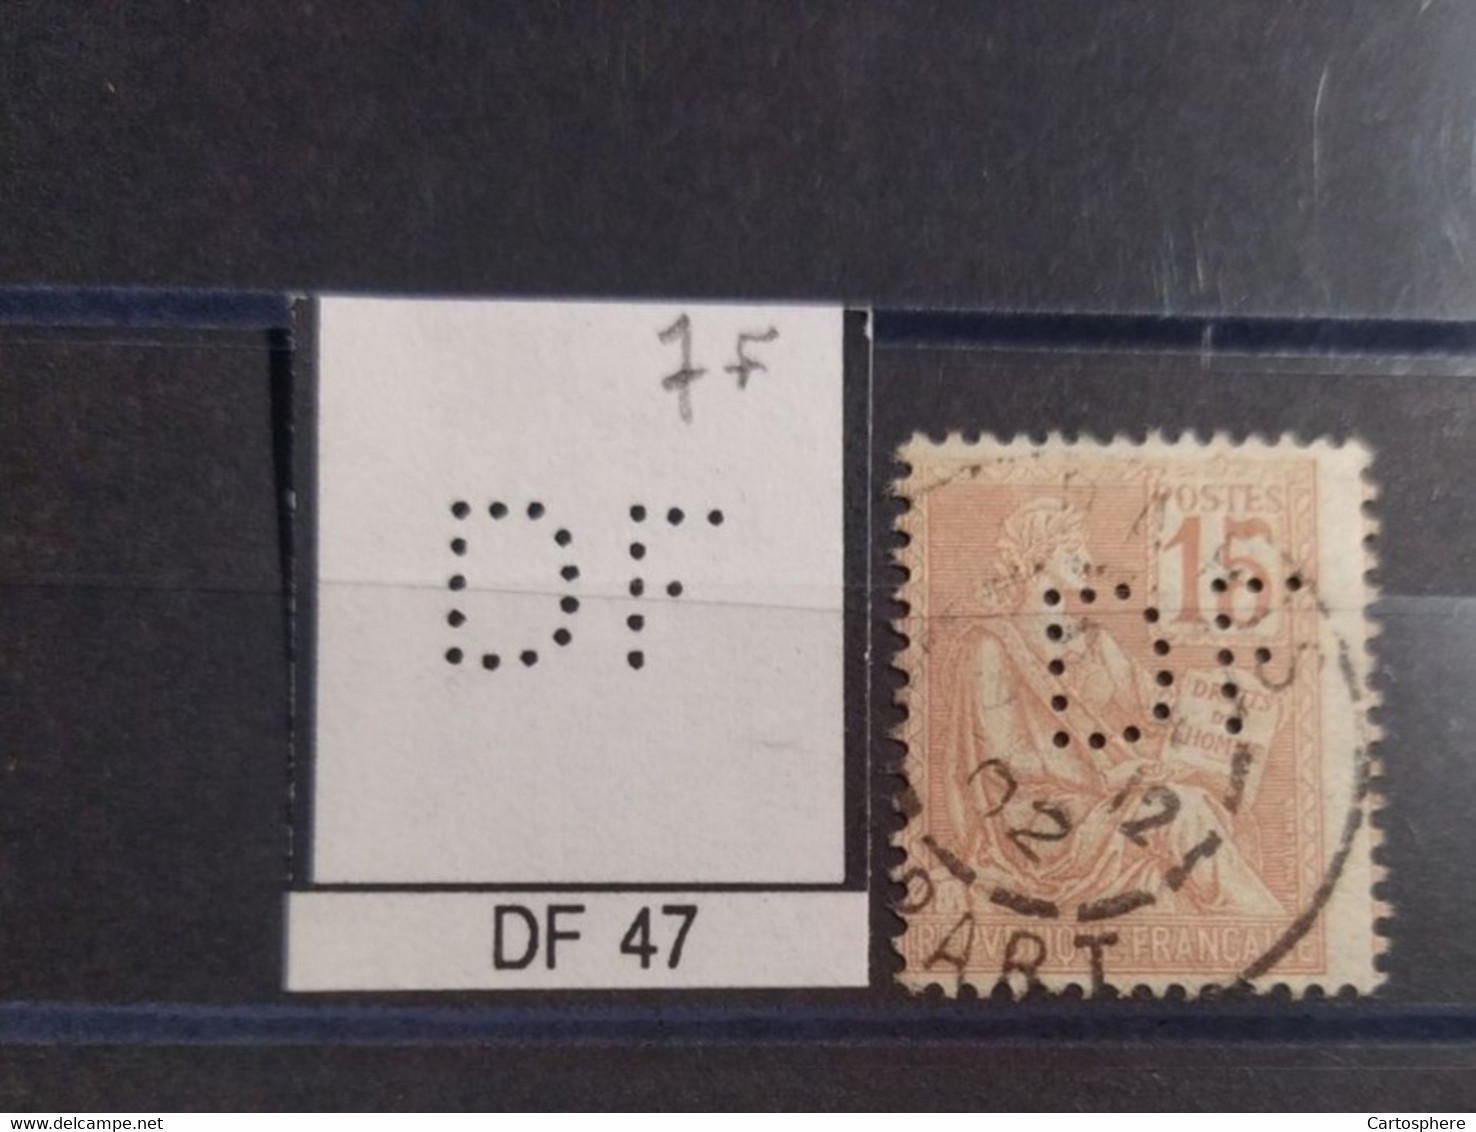 FRANCE DF 47 TIMBRE INDICE 7  PERFORE PERFORES PERFIN PERFINS PERFO PERFORATION PERFORIERT - Gebraucht